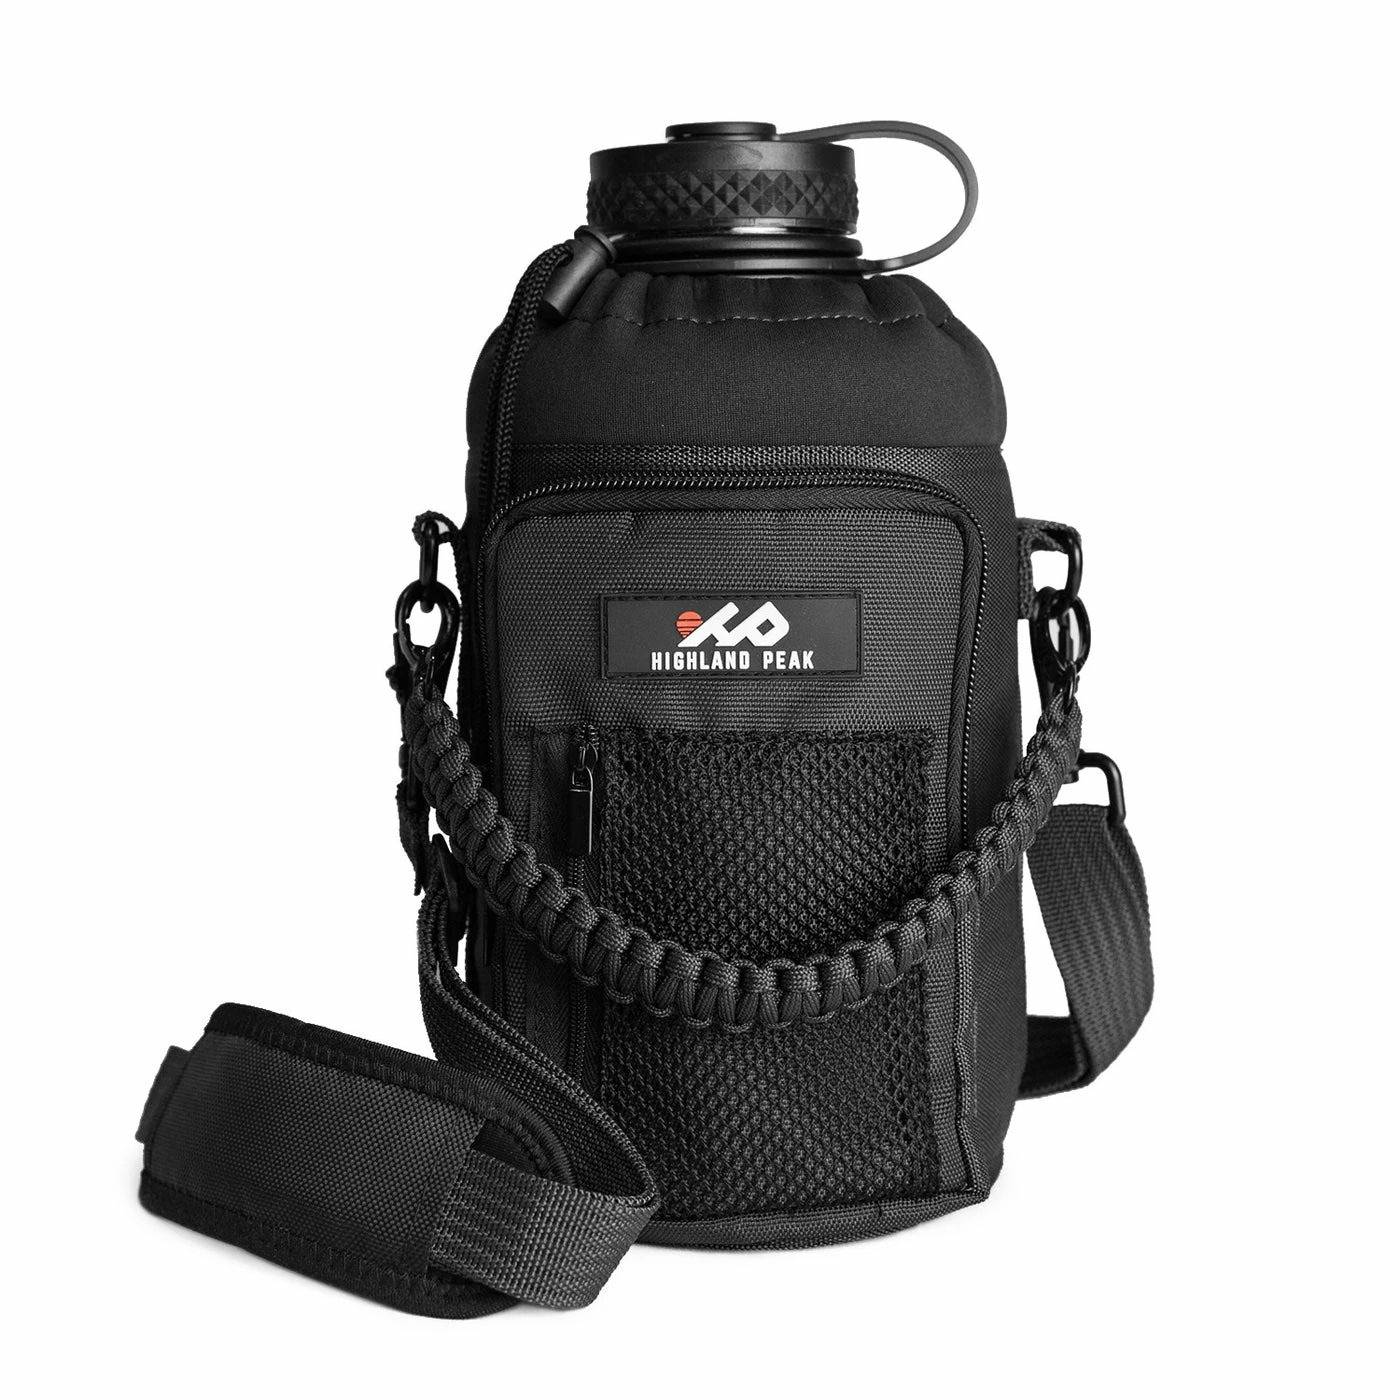 64oz Sleeve/Pouch with Paracord Survival Carrying Handle (Black)